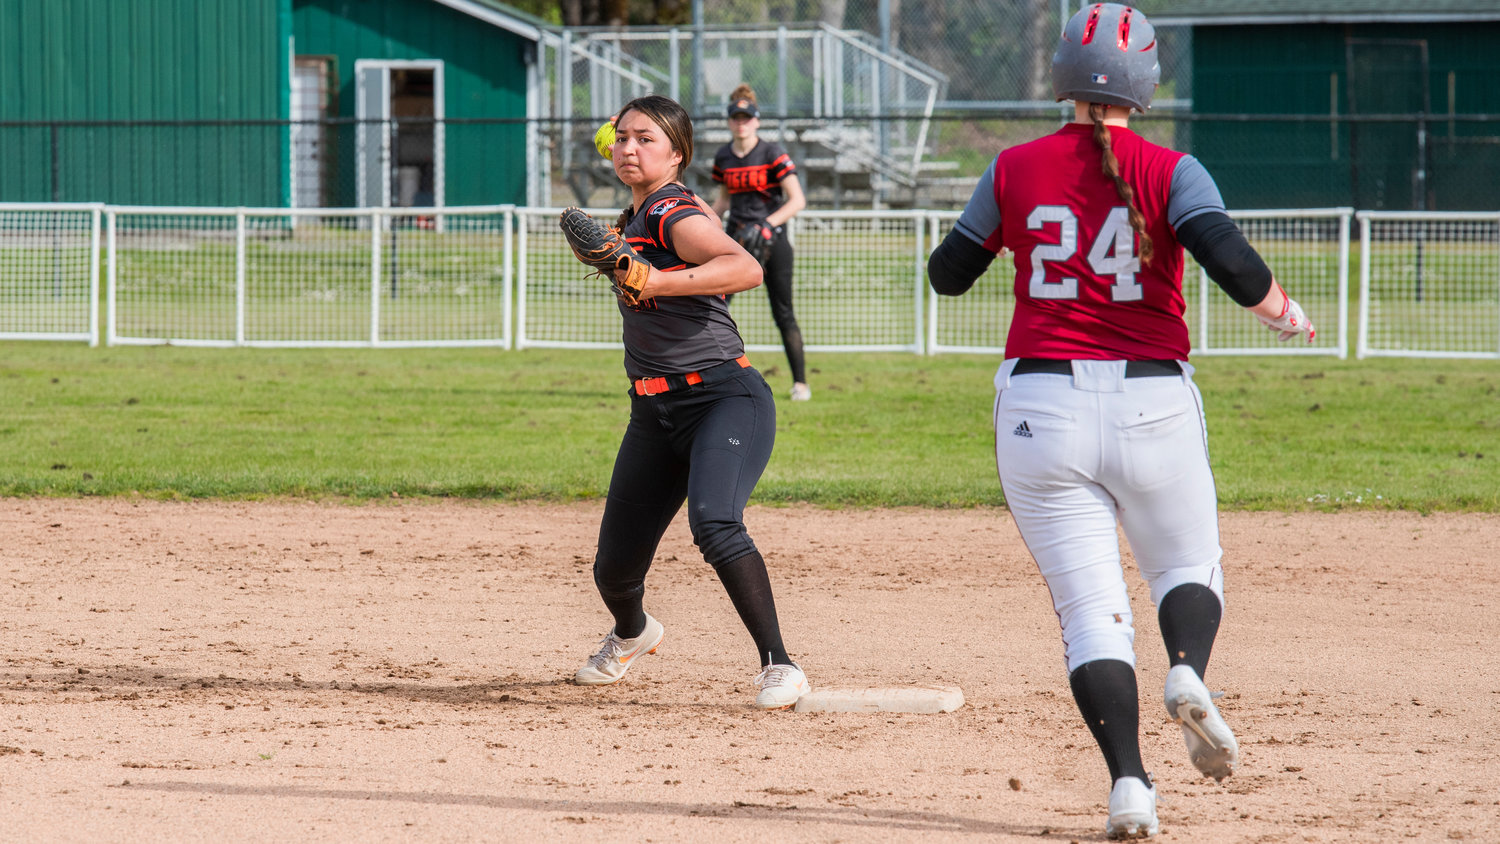 Centralia’s Makayala Chavez (10) turns the double play during a game against W.F. West to end the inning on Wednesday.